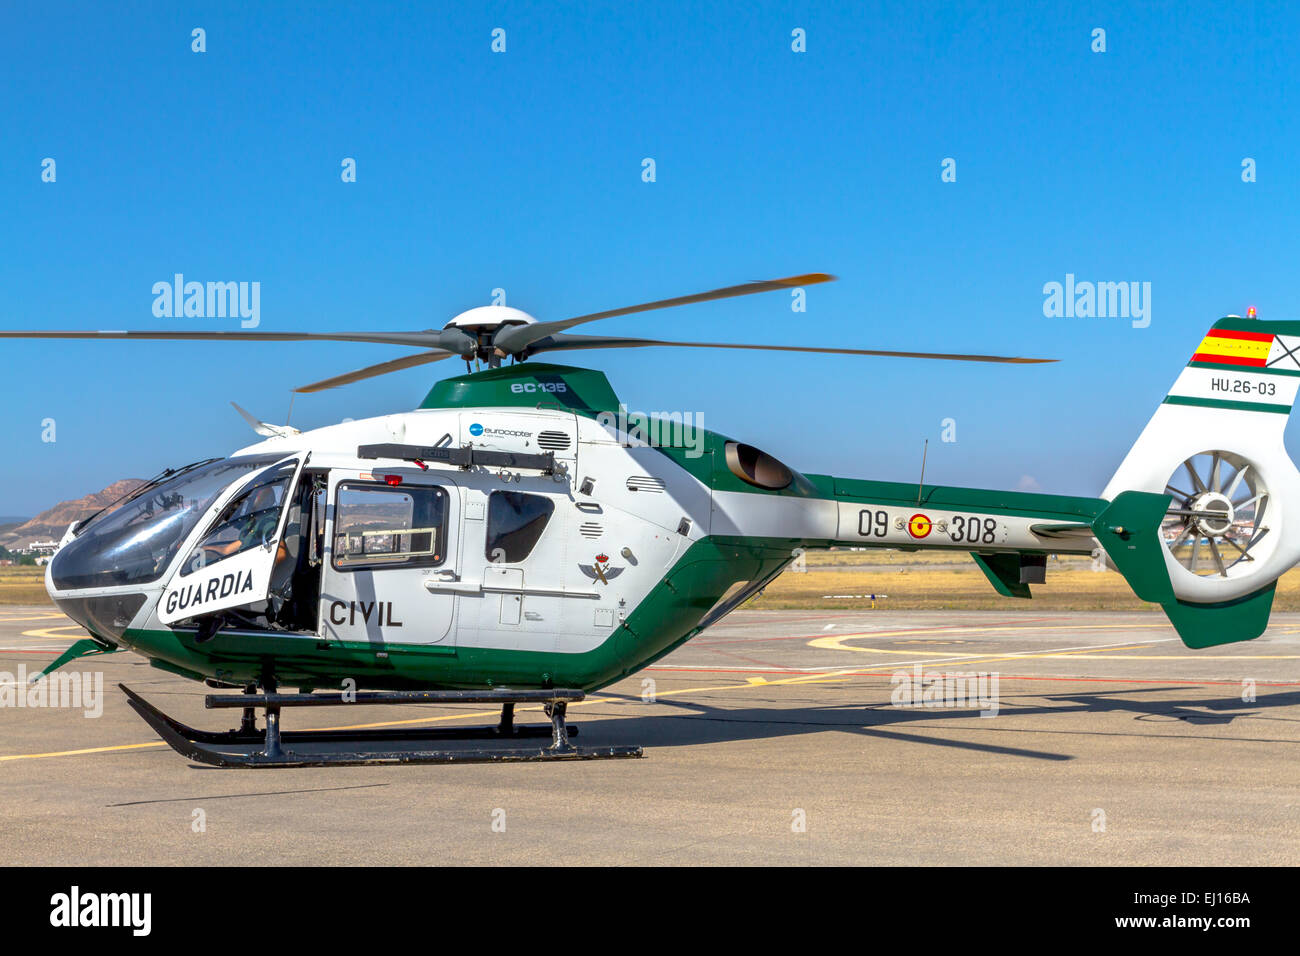 GRANADA, SPAIN-MAY 18: Helicopter Eurocopter EC135 taking part in a exhibition on the X aniversary of the Patrulla Aspa of the airbase of Armilla on May 18, 2014, in Granada, Spain Stock Photo